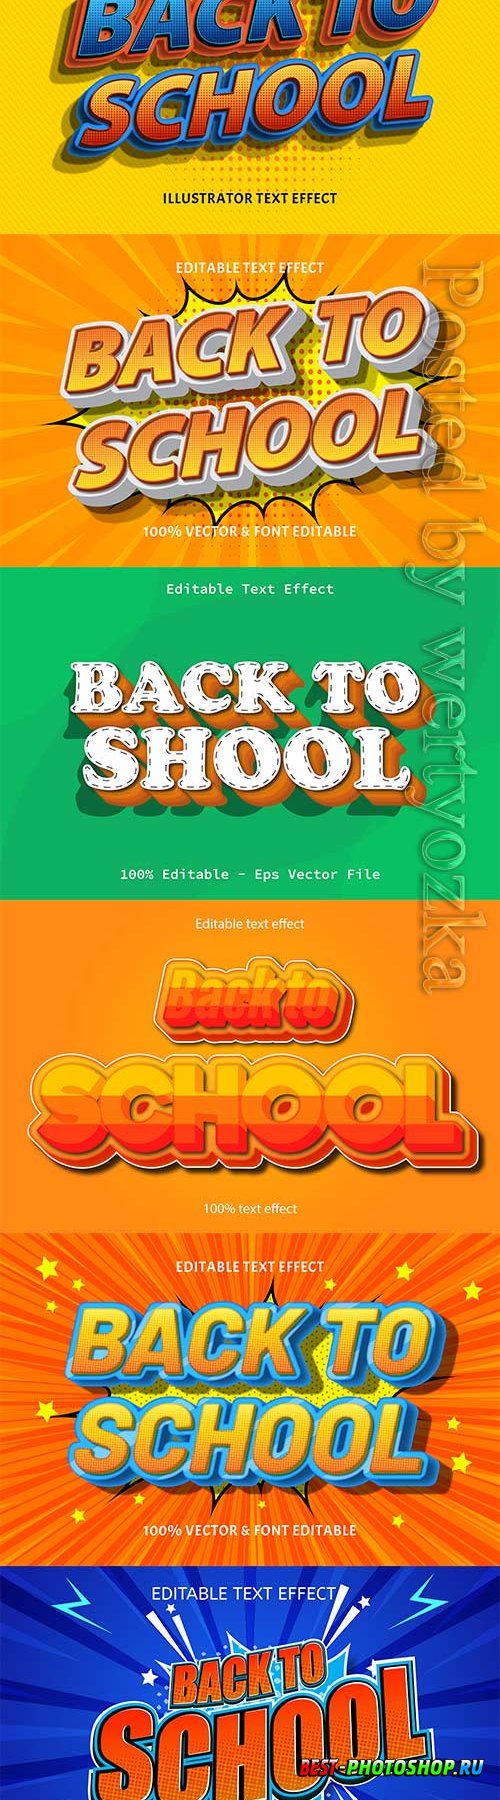 Back to school editable text effect vol 10